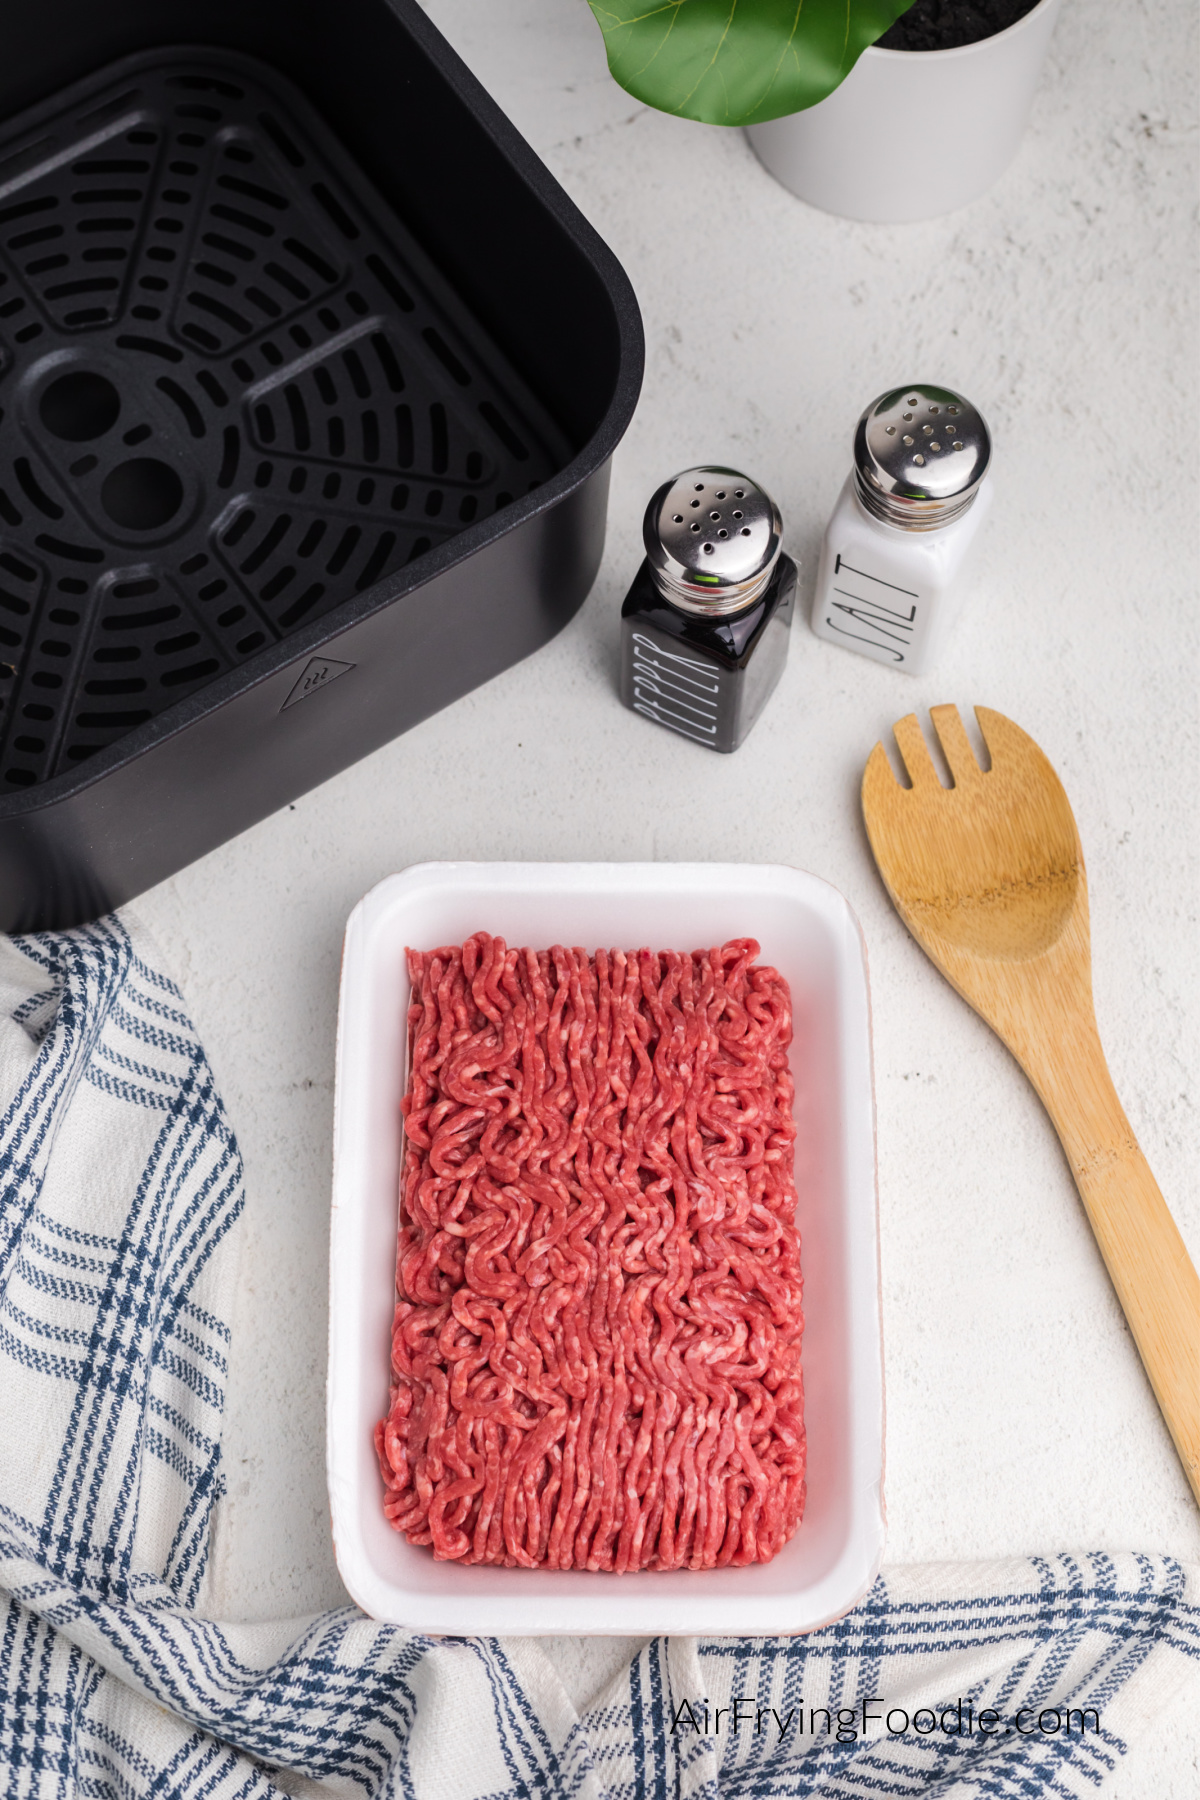 Ground beef in a package ready to cook.